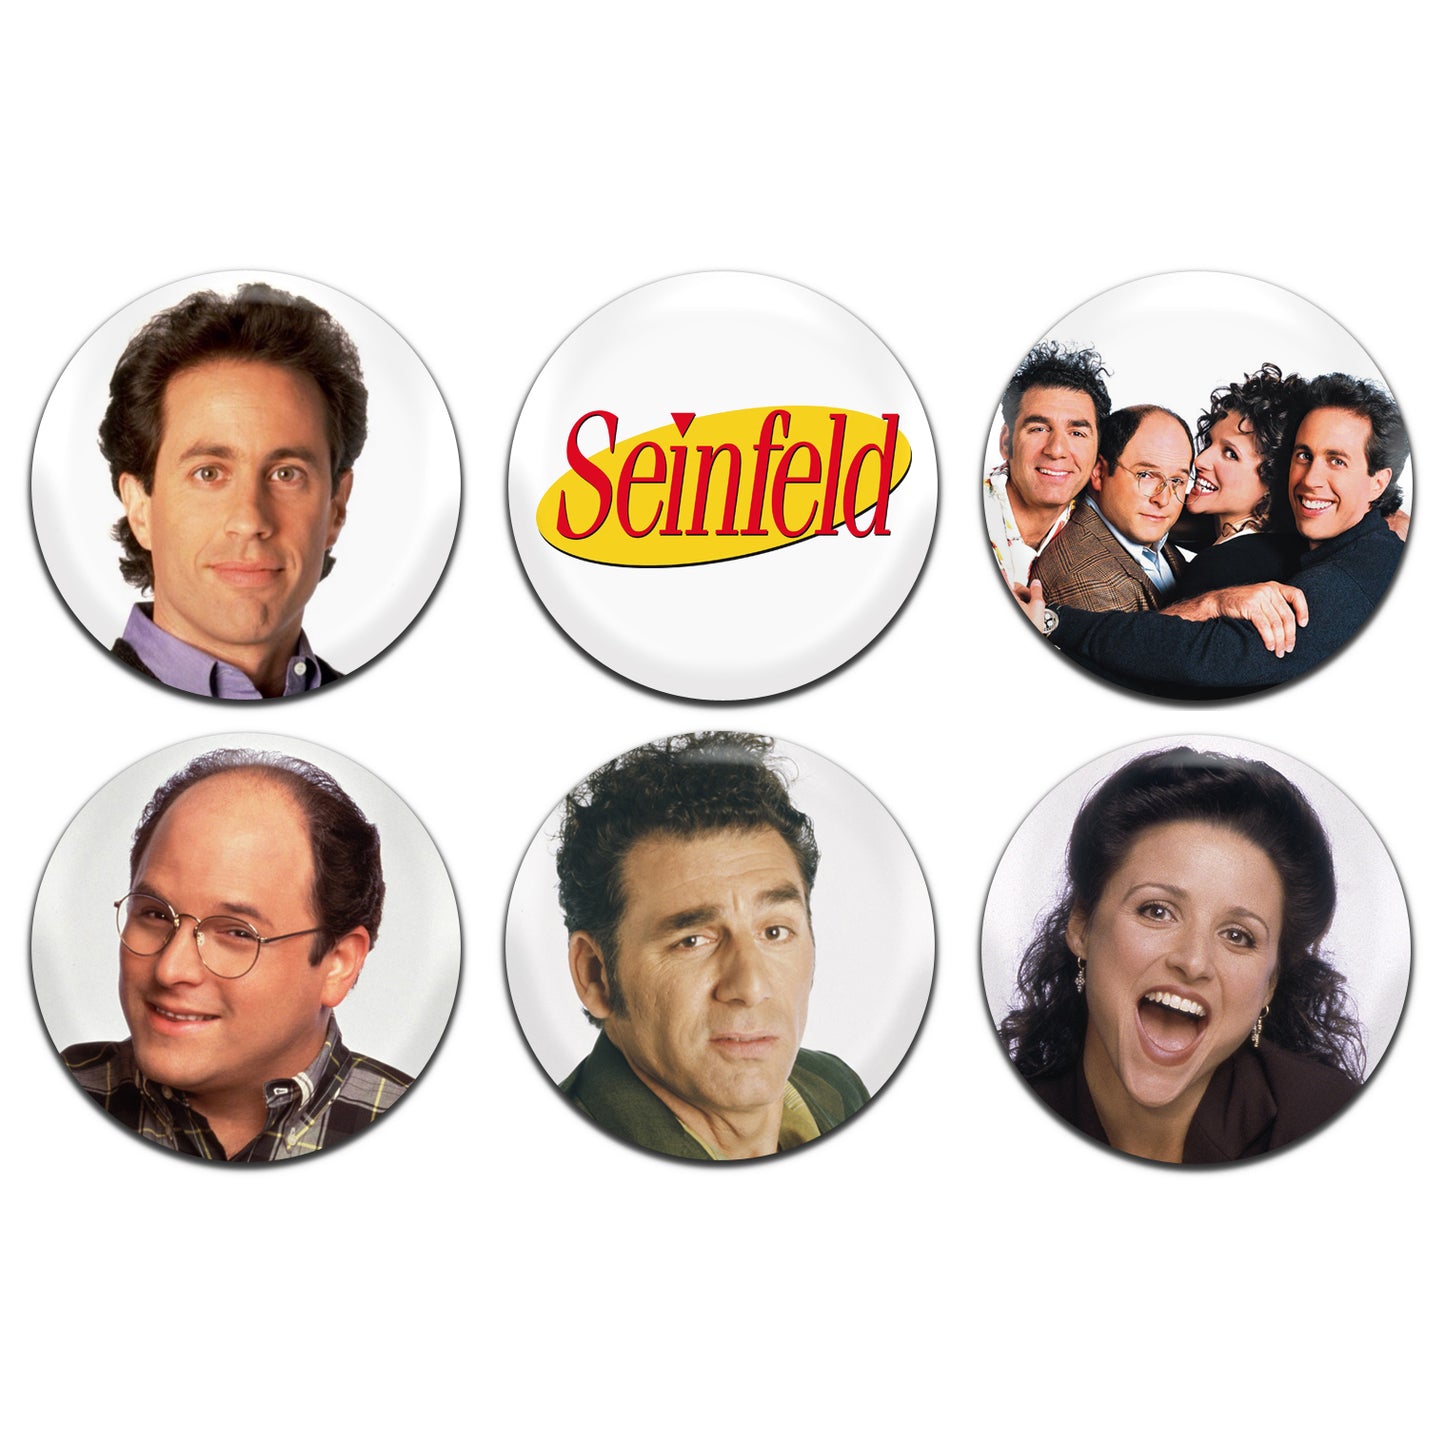 Seinfeld TV Comedy 90's 25mm / 1 Inch D-Pin Button Badges (6x Set)